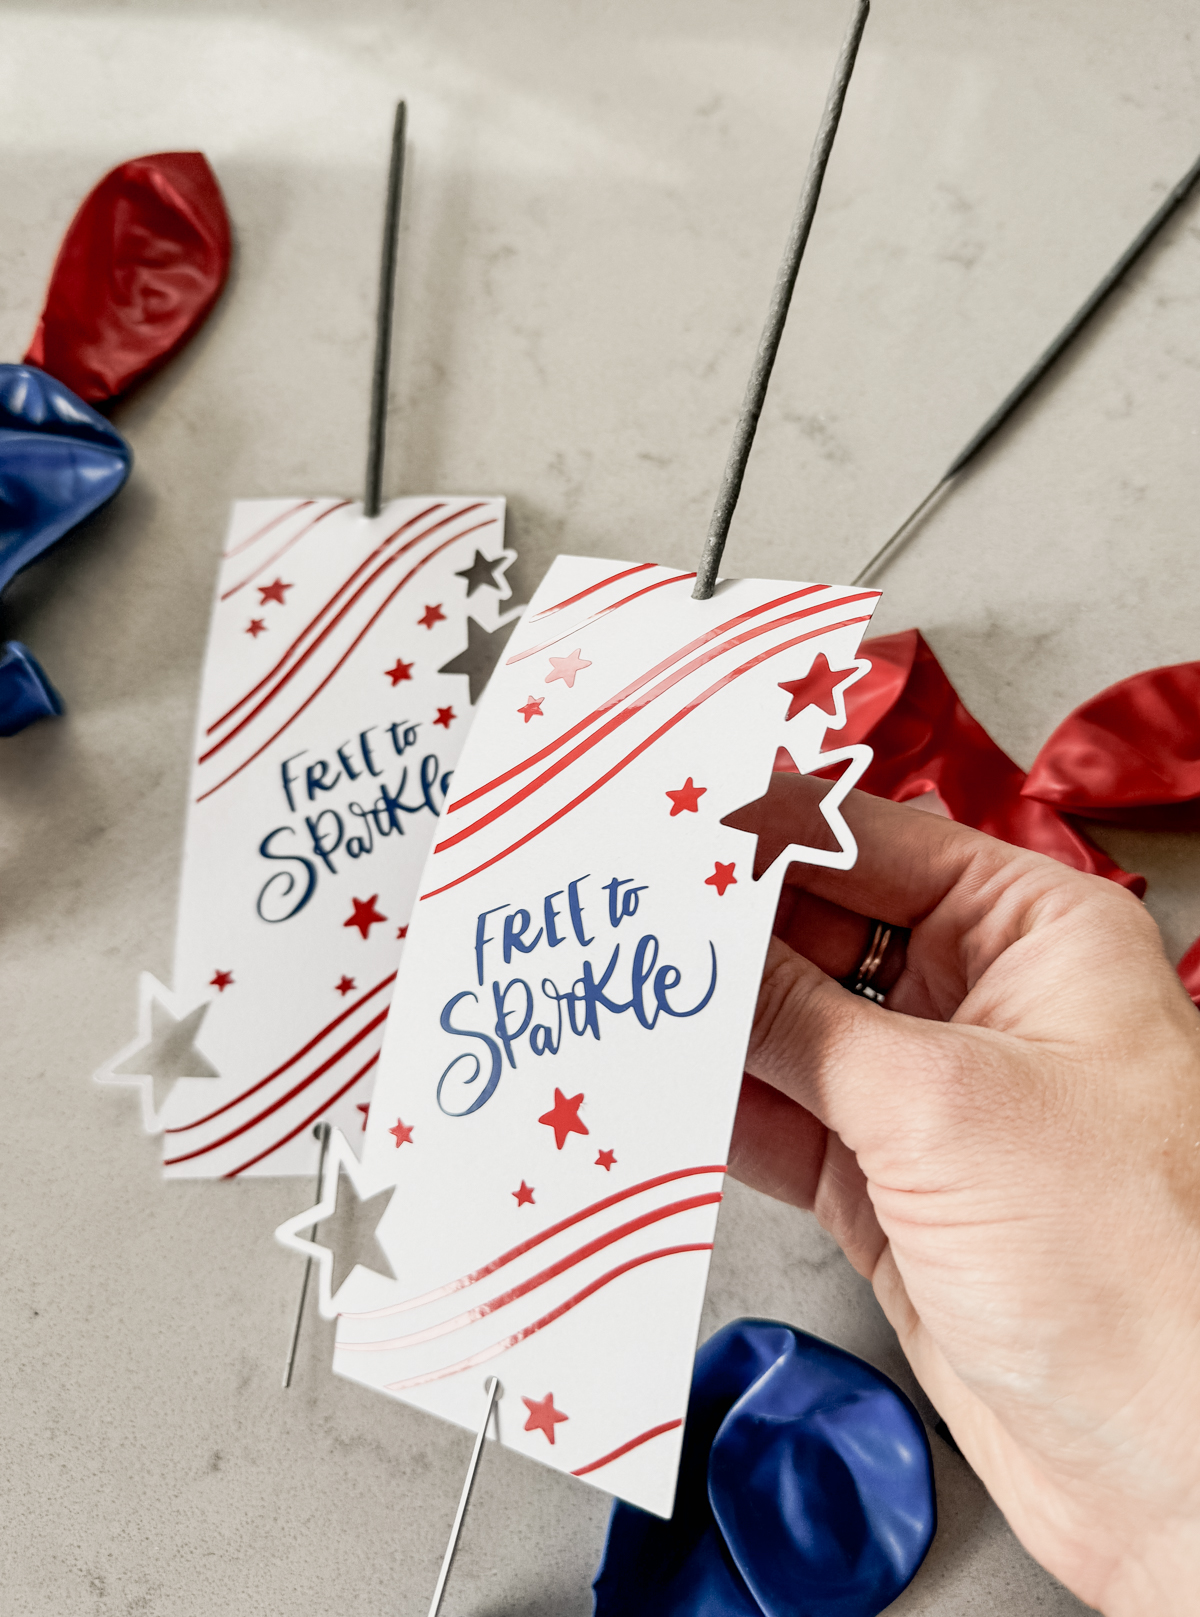 image of fourth of july sparklers holders free svg file with 3 layers, shown assembled with sparklers, being held by hand above a countertop with red and blue balloons